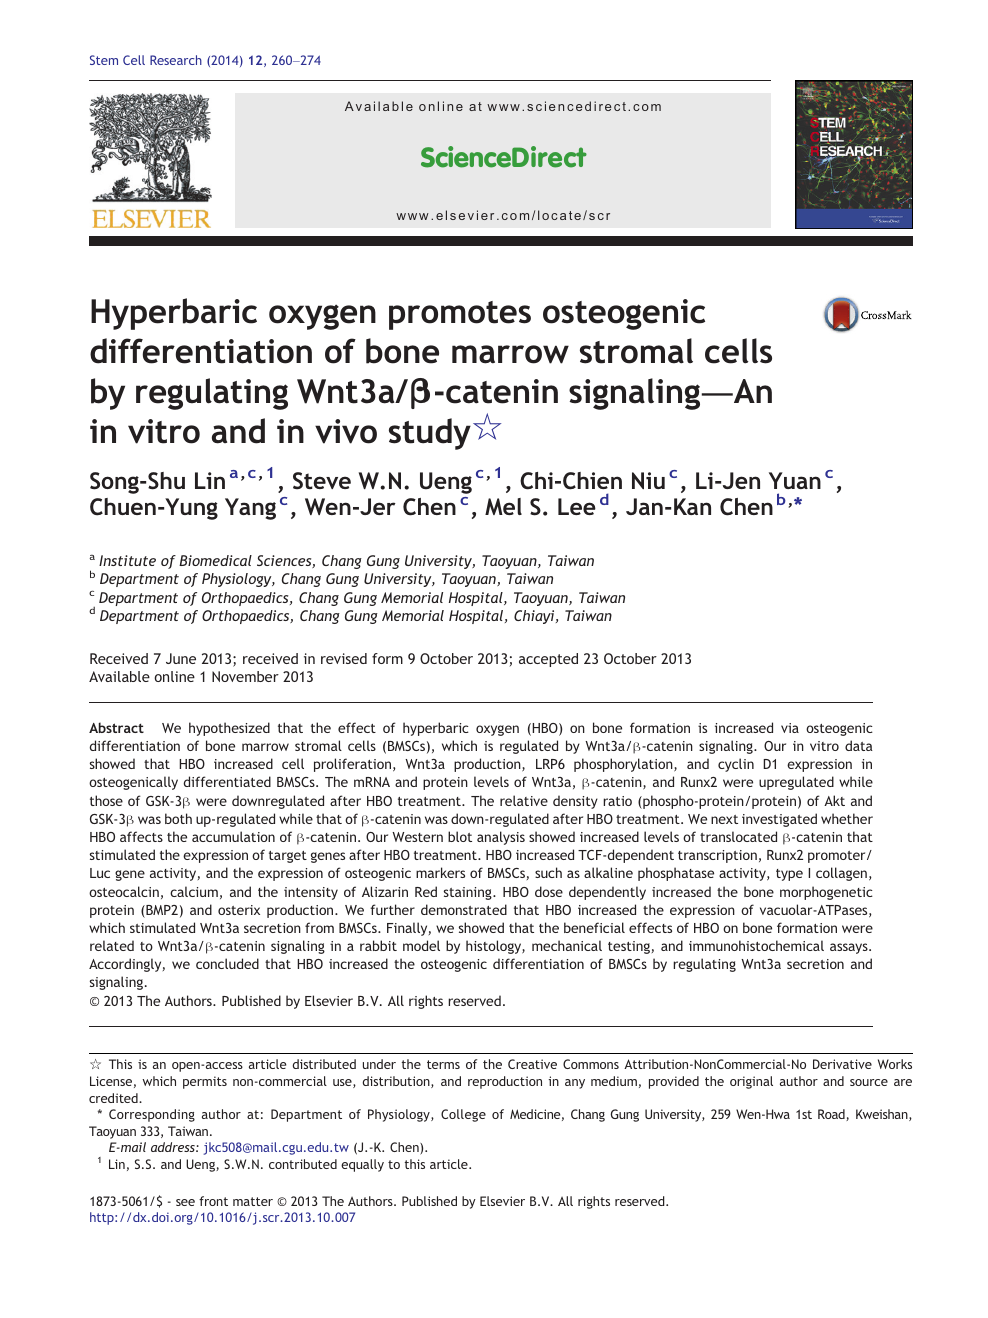 Hyperbaric Oxygen Promotes Osteogenic Differentiation Of Bone Marrow Stromal Cells By Regulating Wnt3a B Catenin Signaling An In Vitro And In Vivo Study Topic Of Research Paper In Biological Sciences Download Scholarly Article Pdf